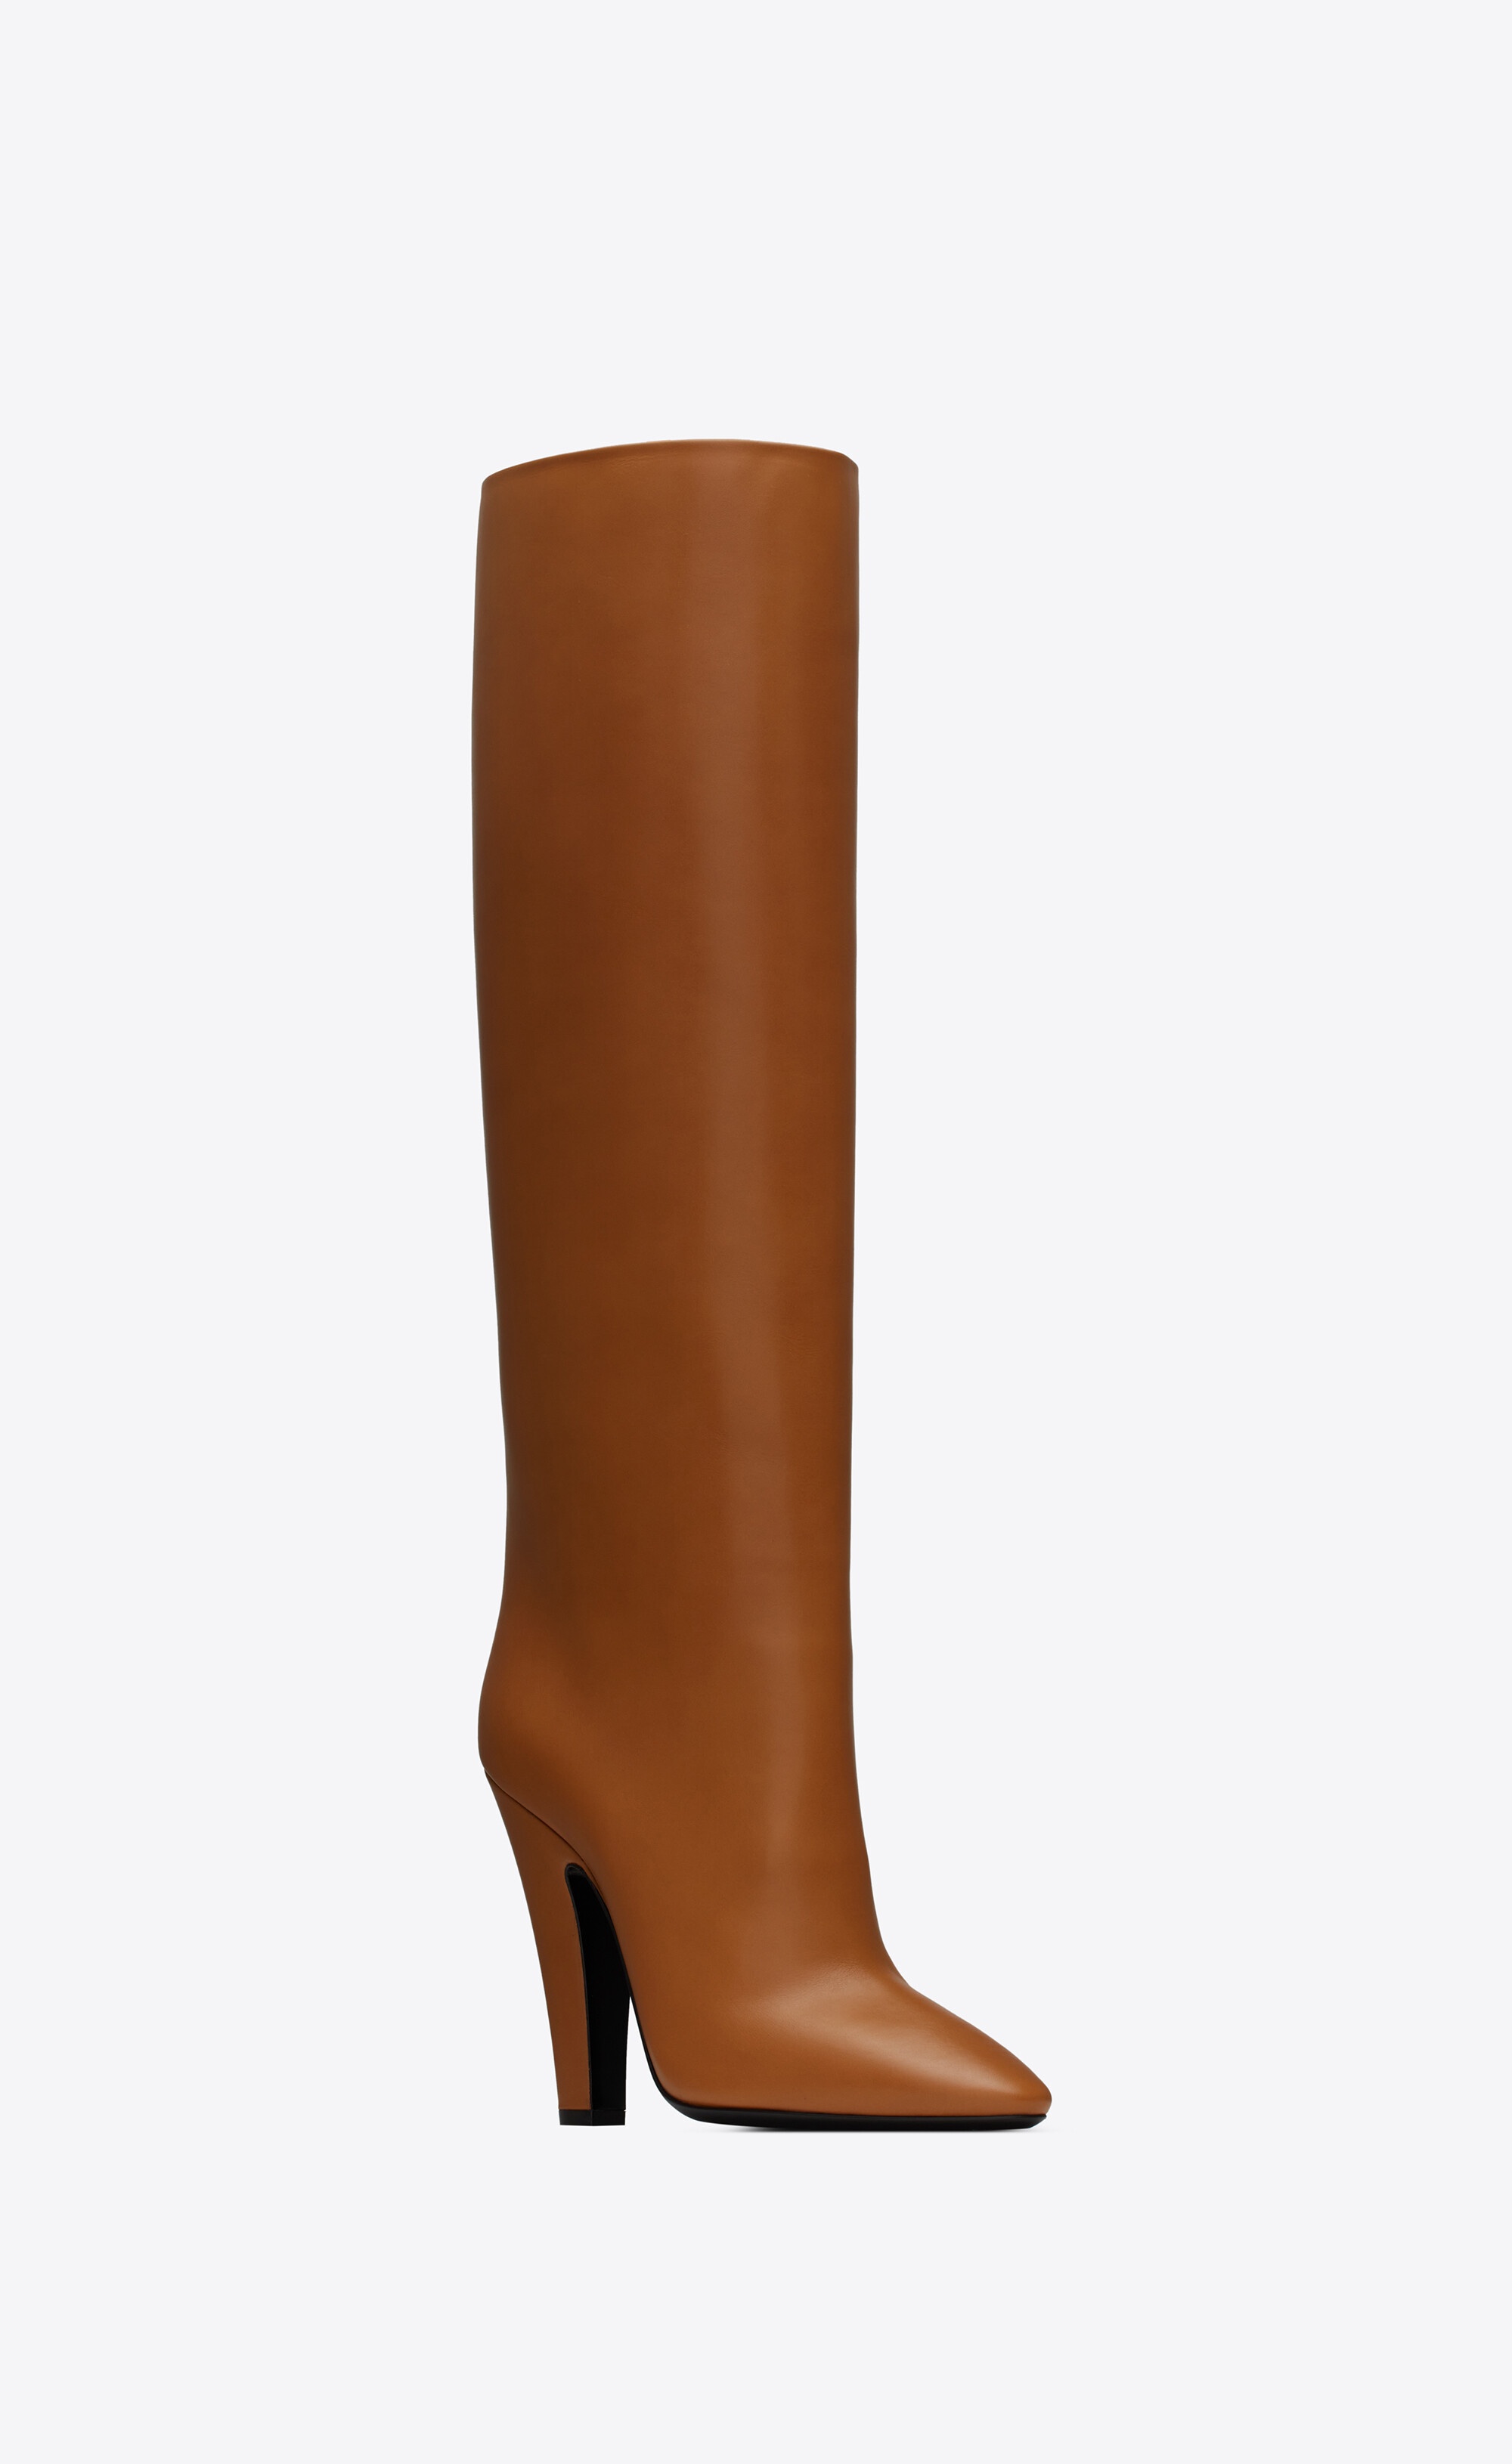 68 tube boots in smooth leather - 5